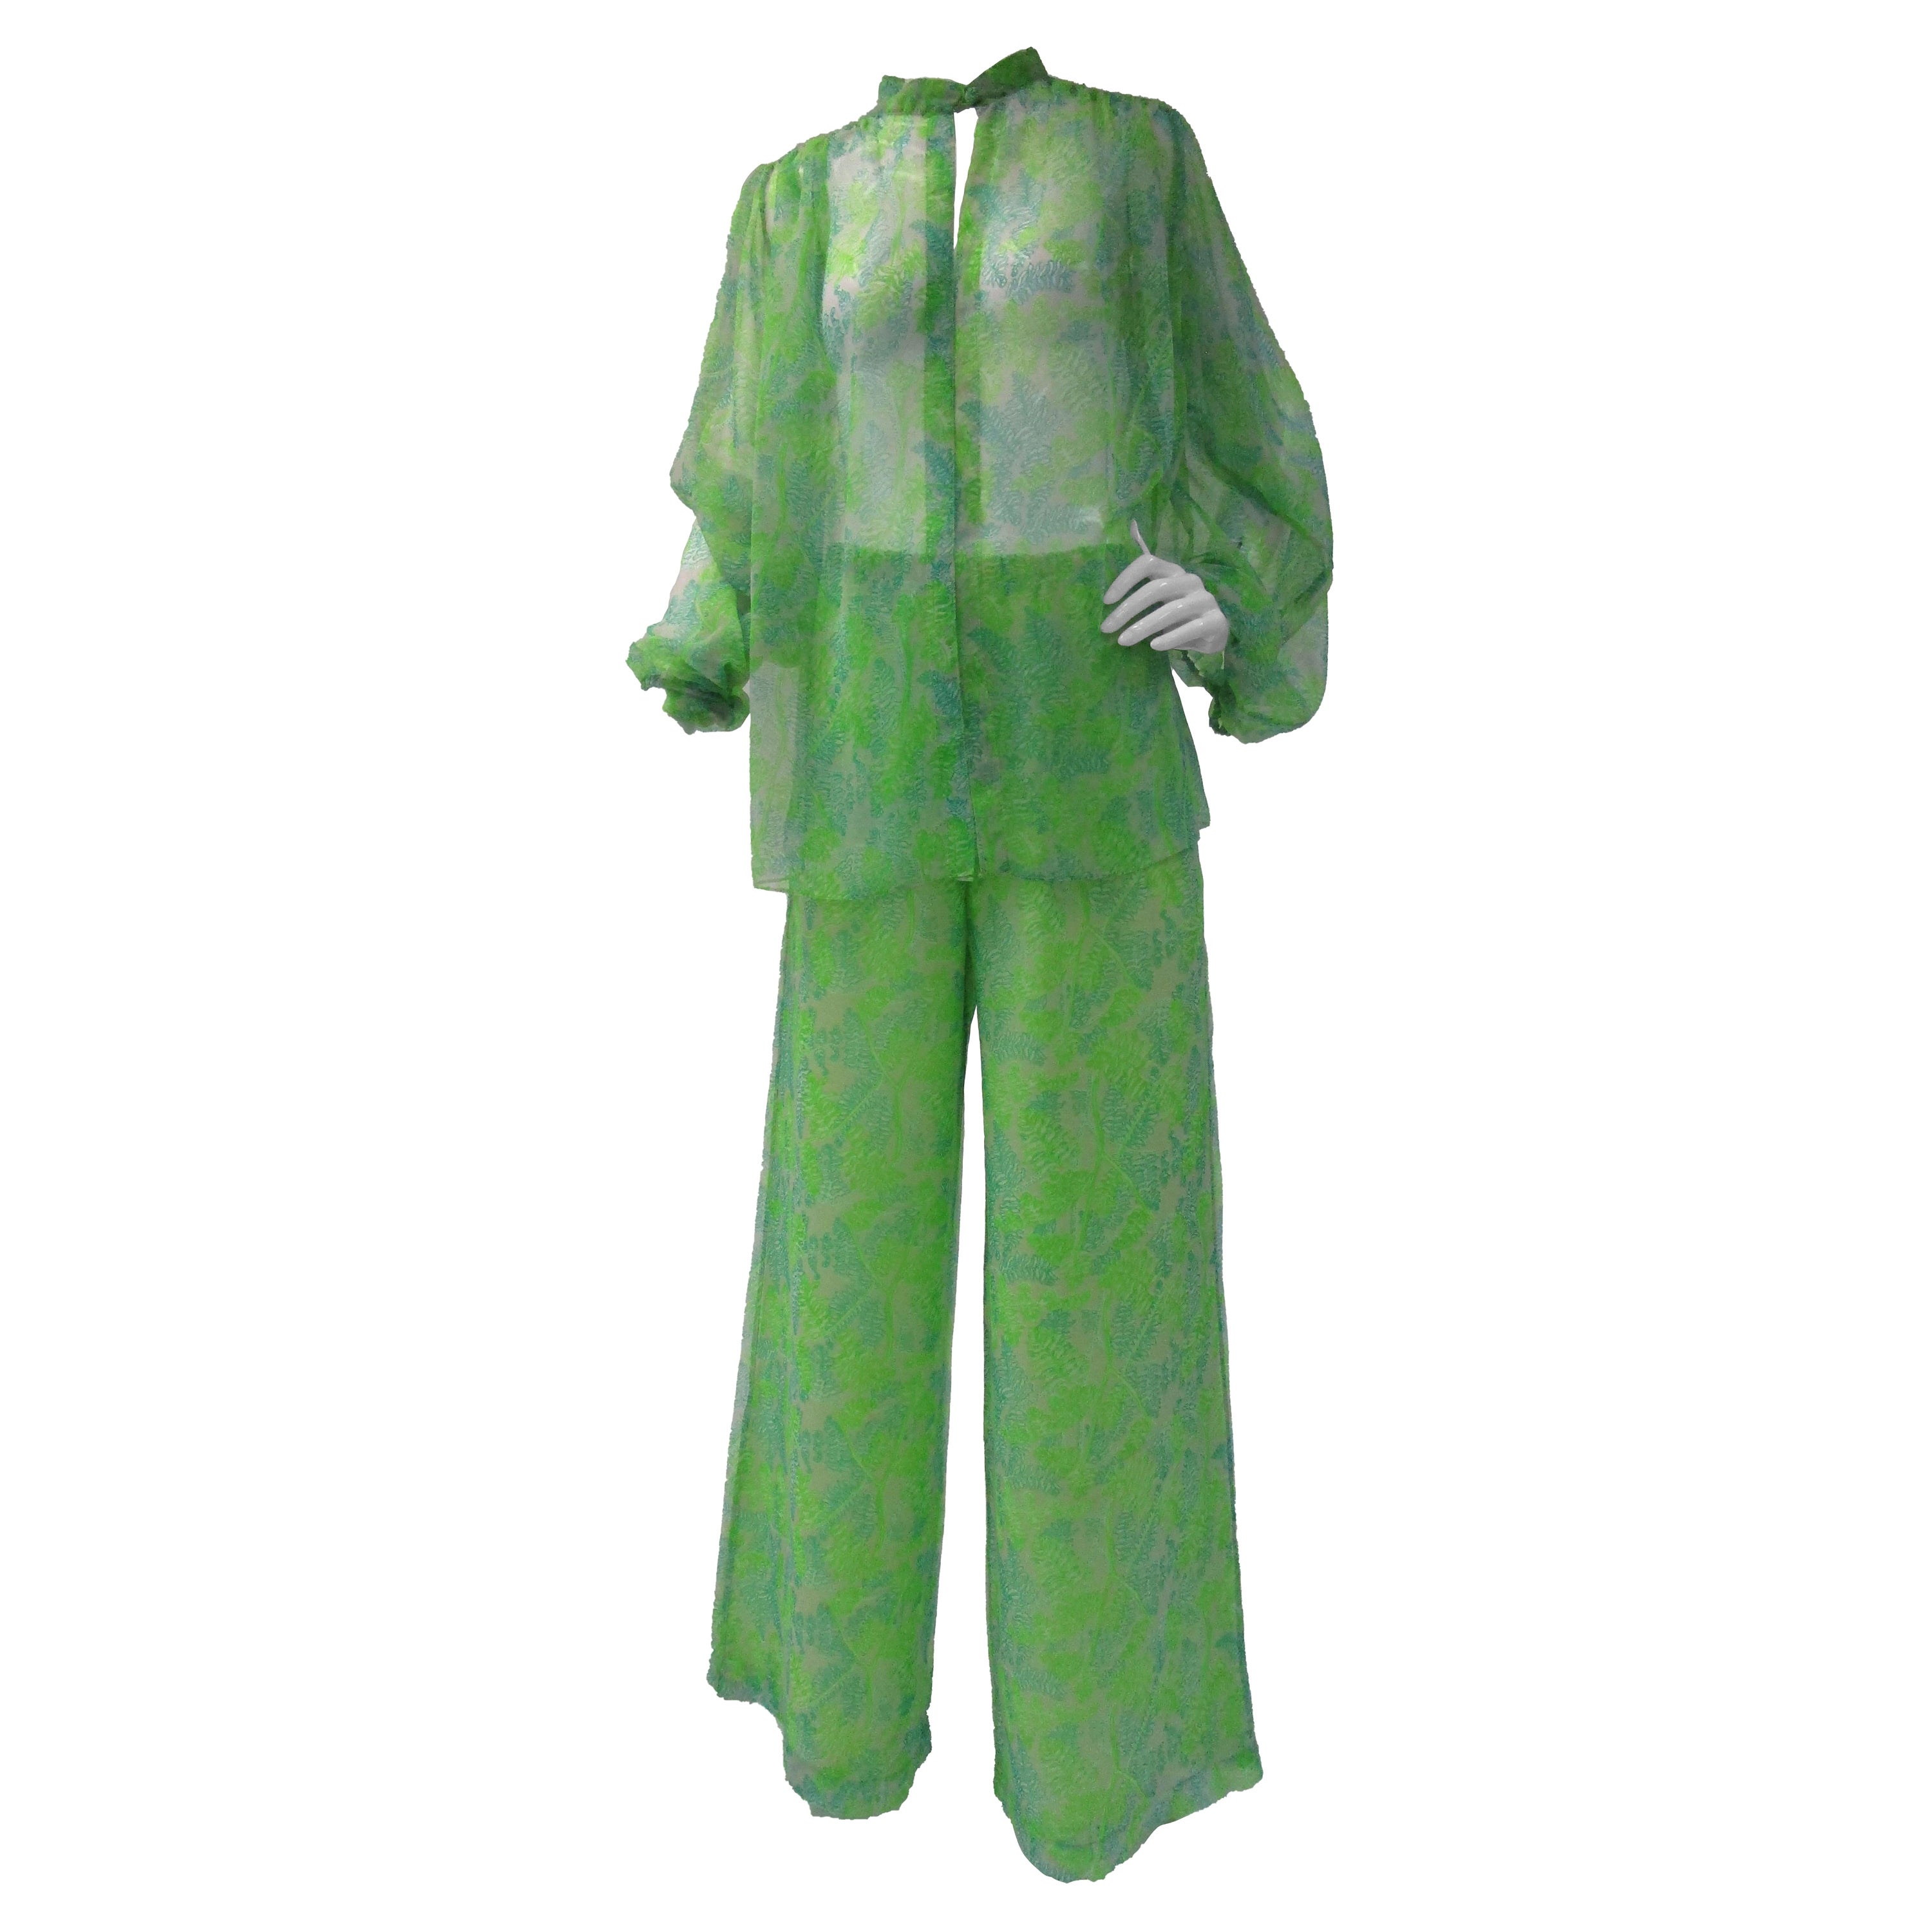 Rare 1970s “Liza” by Lilly Pulitzer Green Sheer Resort Ensemble  For Sale